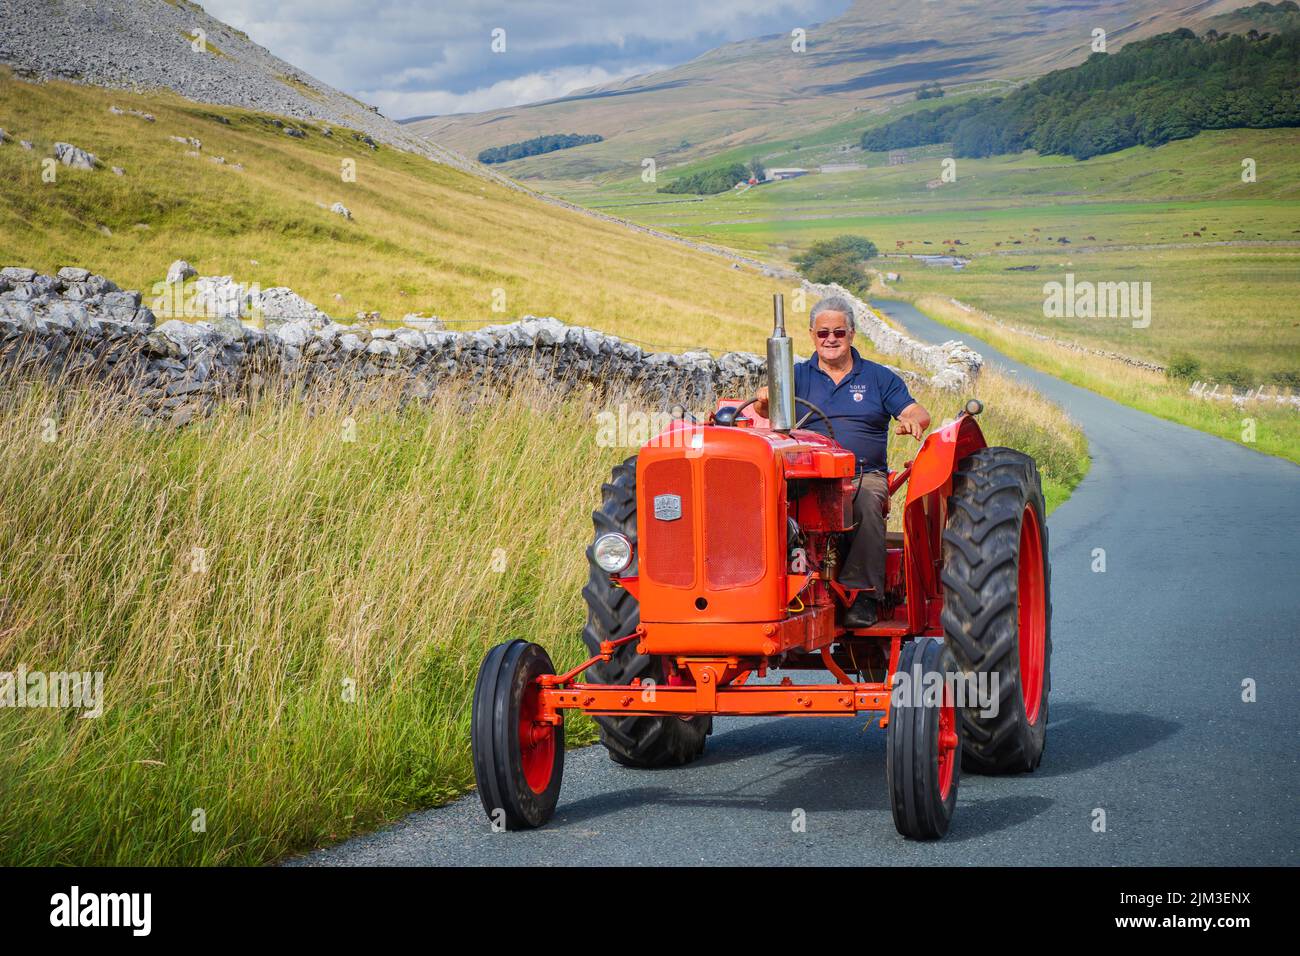 31.07.2022 Ingleton, North Yorkshire, UK A man wearing sunglasses, a blue shirt driving a vintage red tractor in the Yorkshire Dales Stock Photo